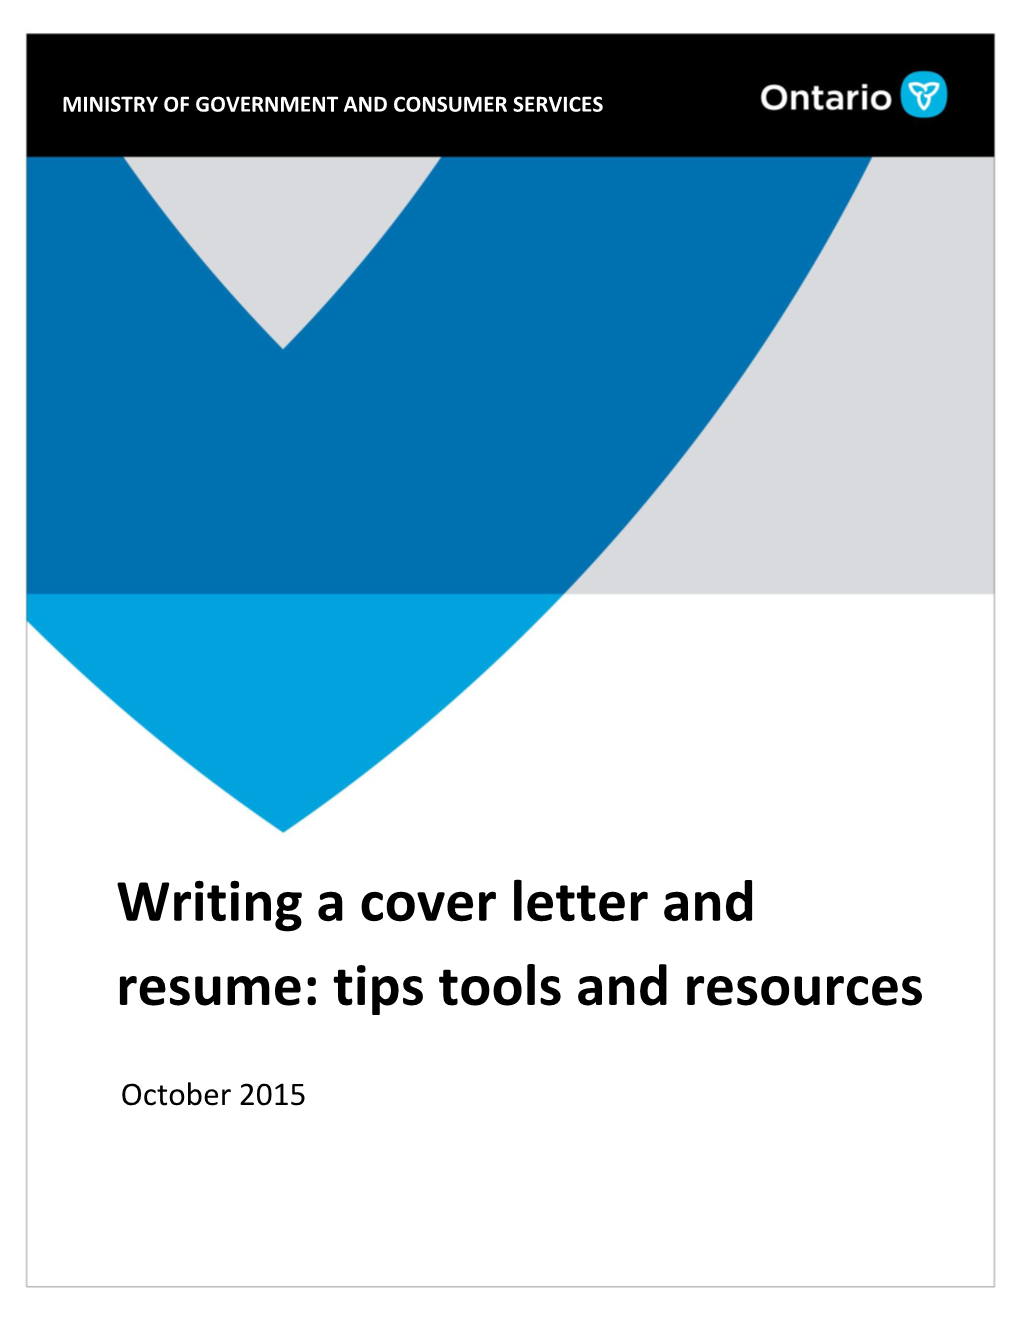 Writing a Cover Letter and Resume: Tips, Tools and Resources